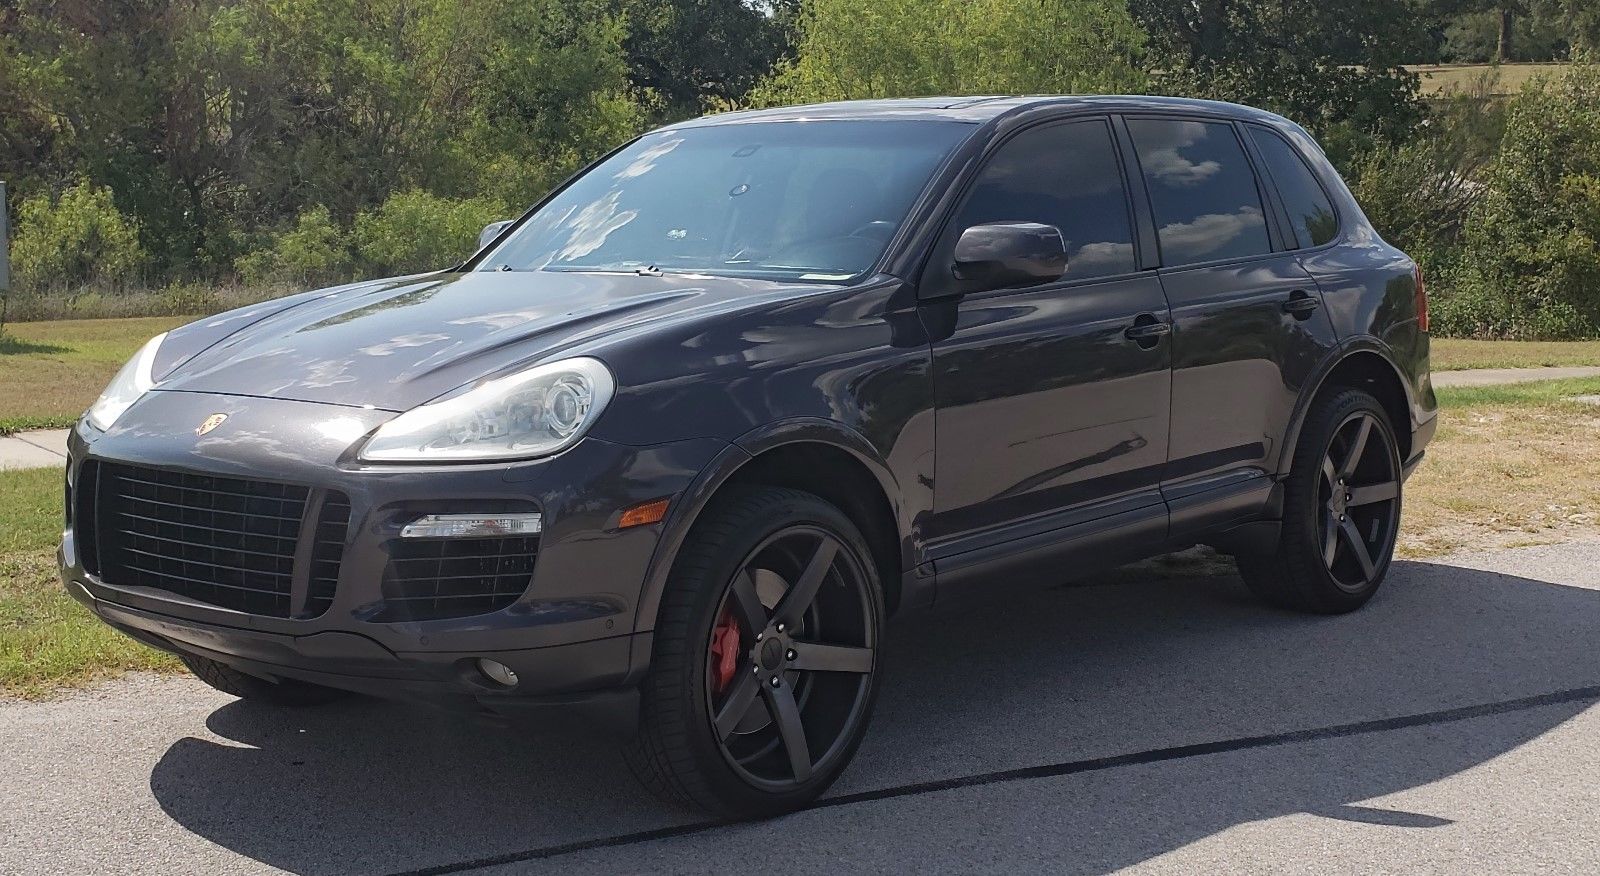 09 Porsche Cayenne Turbo S 09 Porsche Cayenne Turbo S 550hp 18 19 Is In Stock And For Sale 24carshop Com